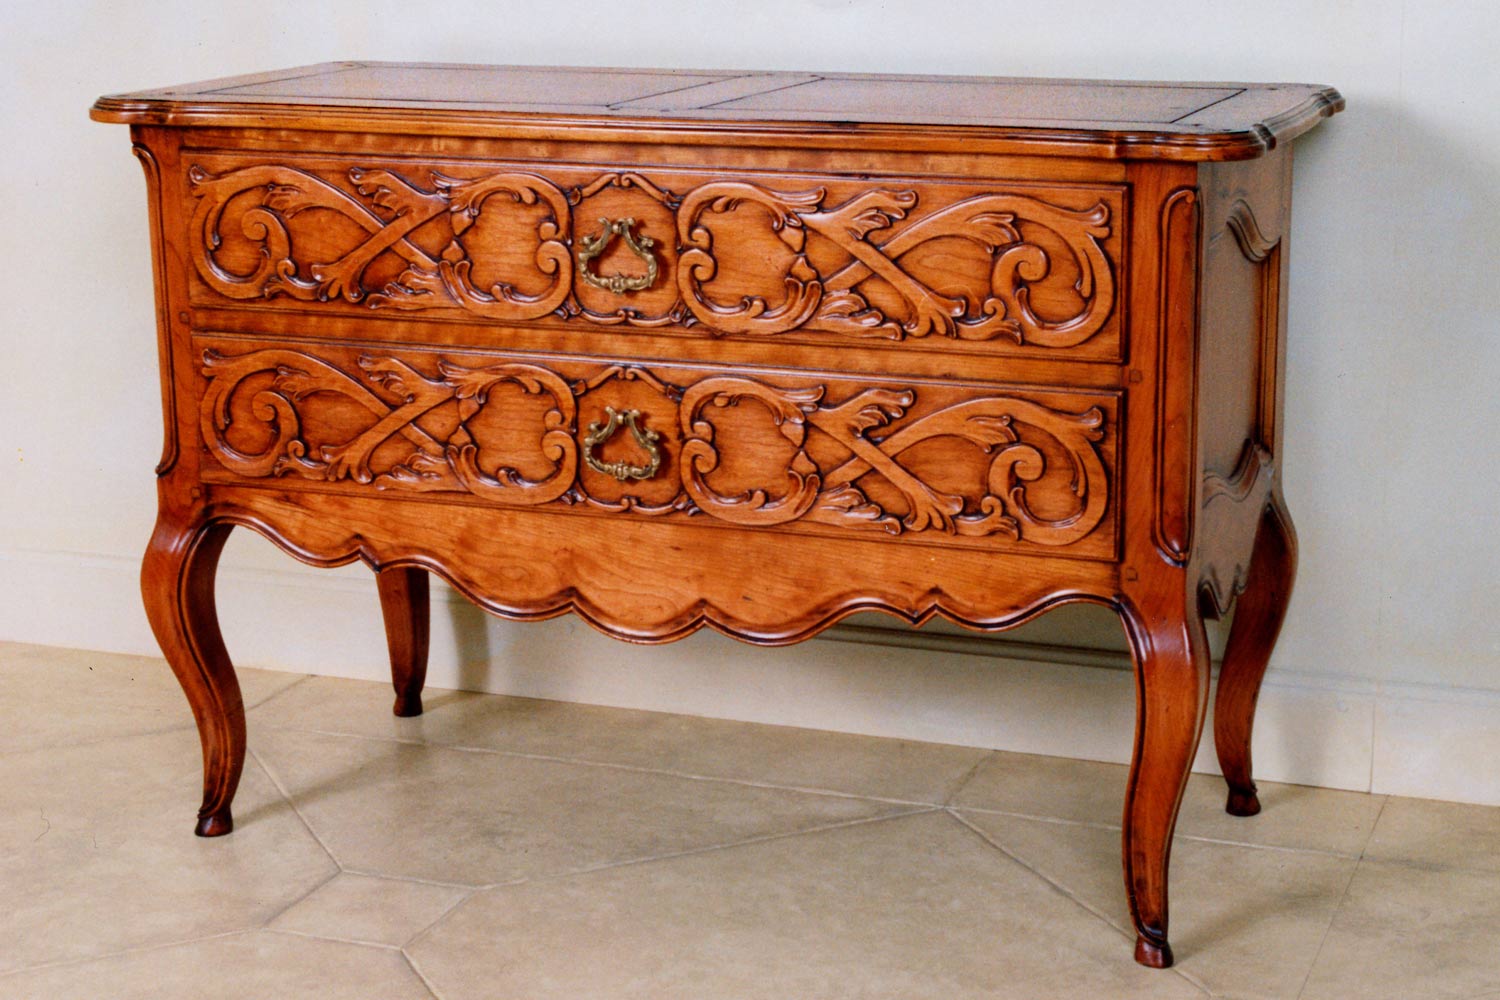 14 French Provincial cherry-wood furniture by Jean-Christophe Burckhardt